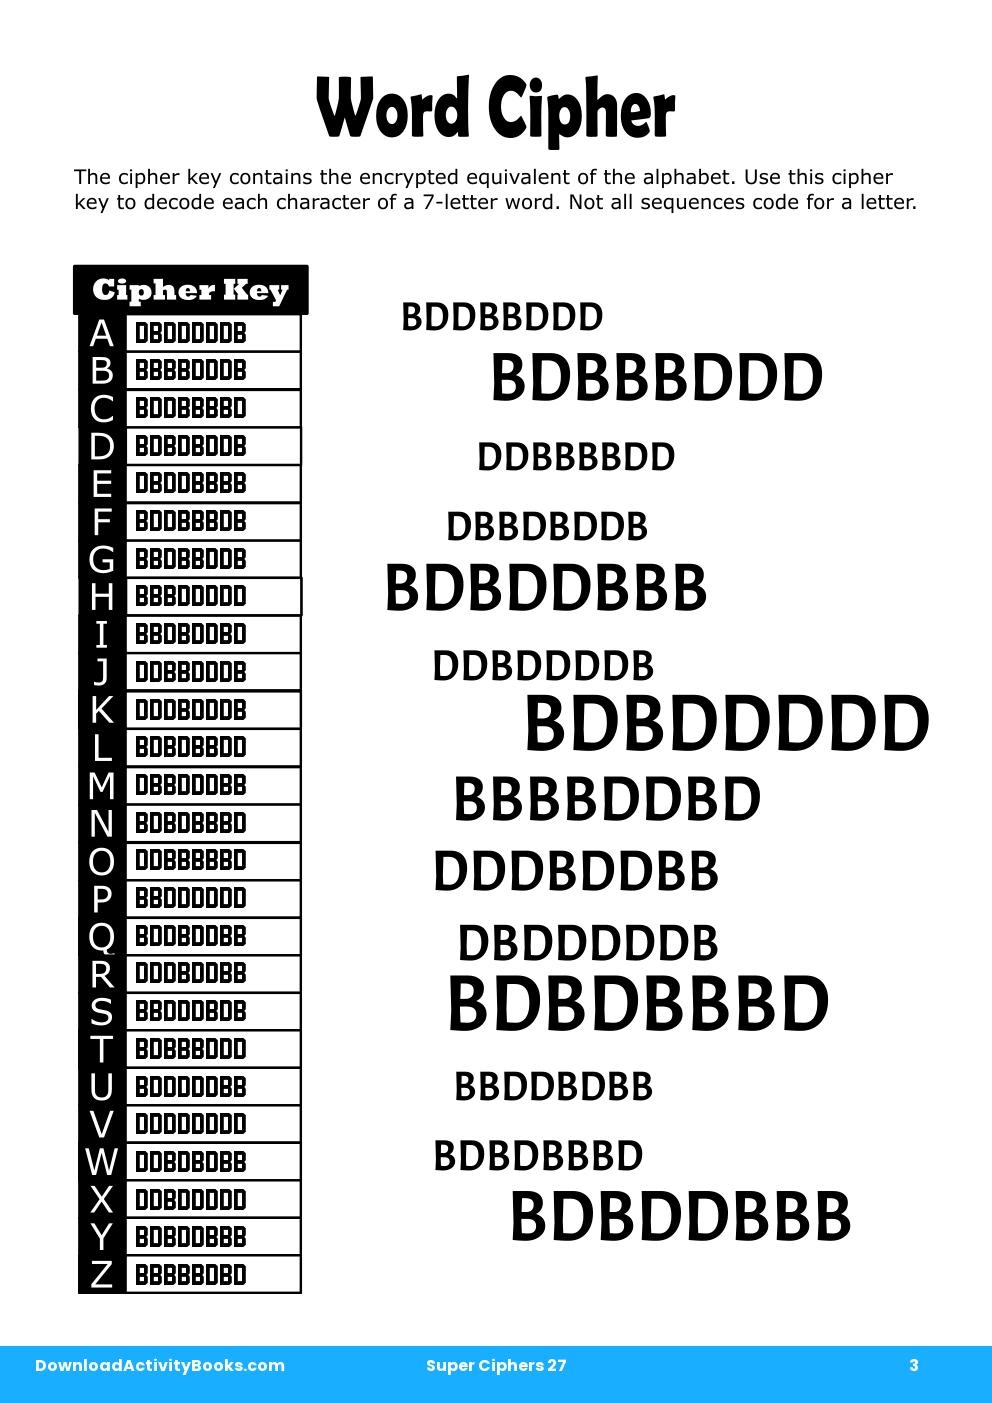 Word Cipher in Super Ciphers 27